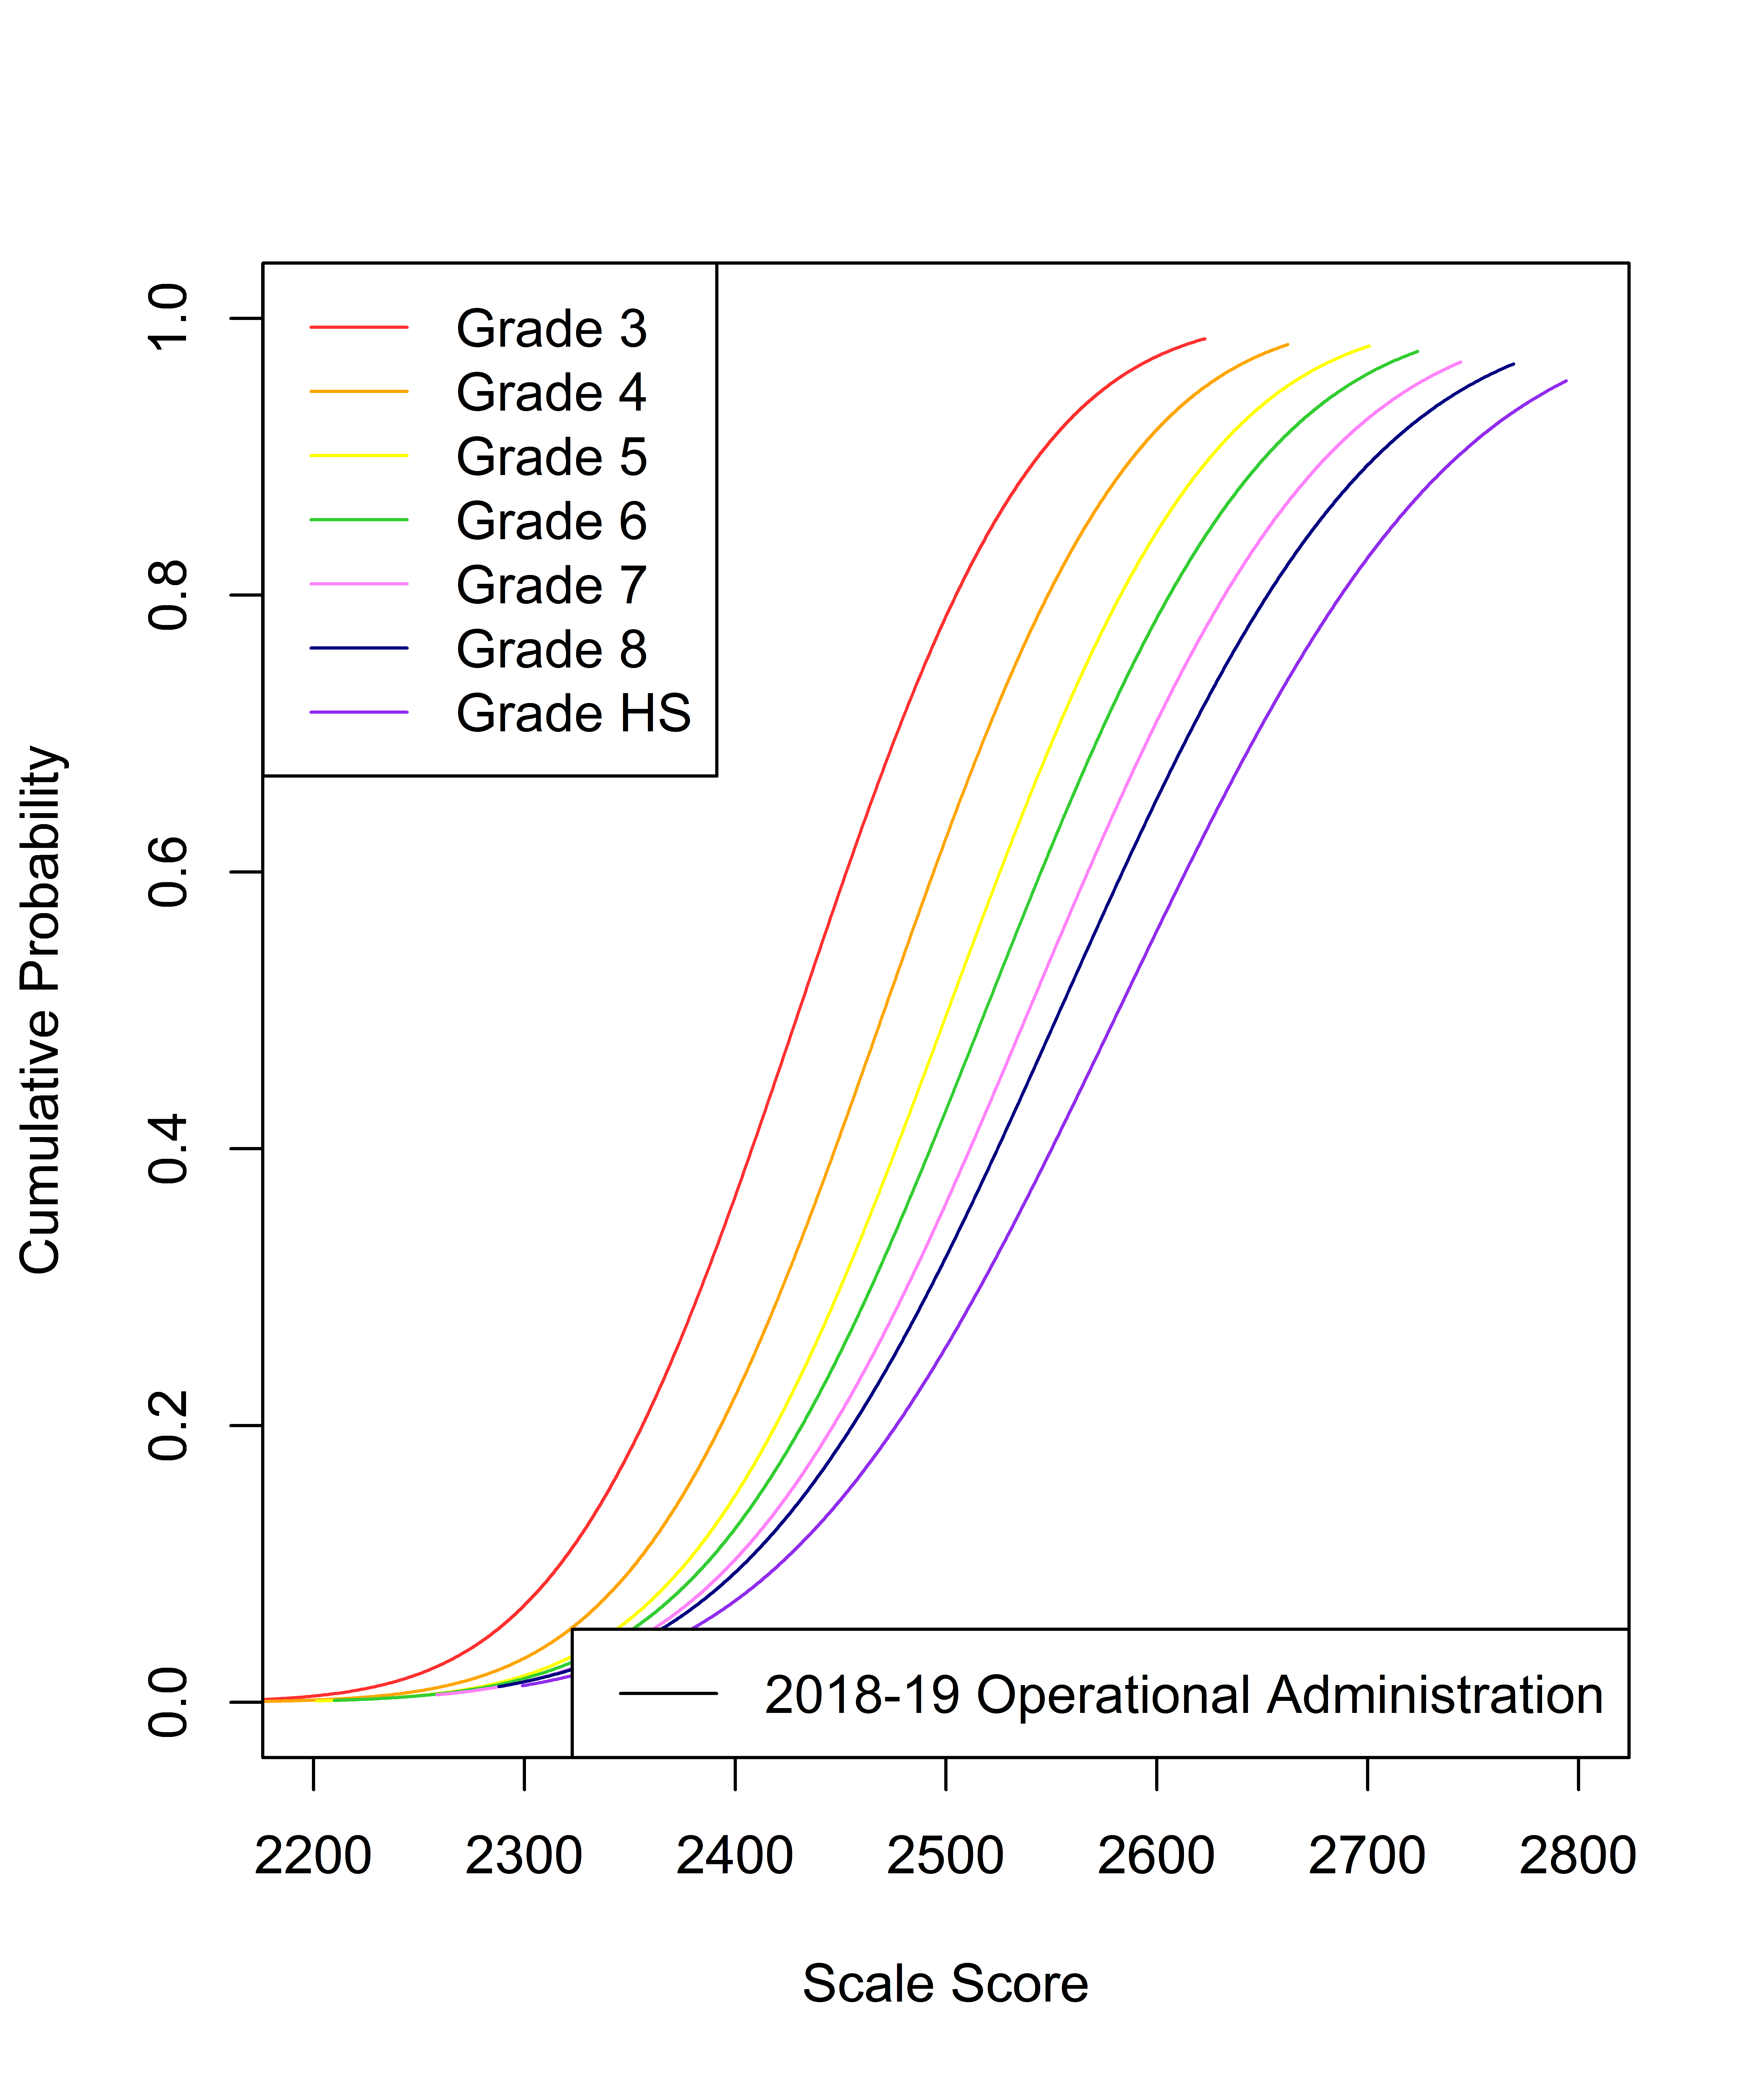 Test Characteristic Curves for Vertically Scaled Tests (ELA/Literacy)